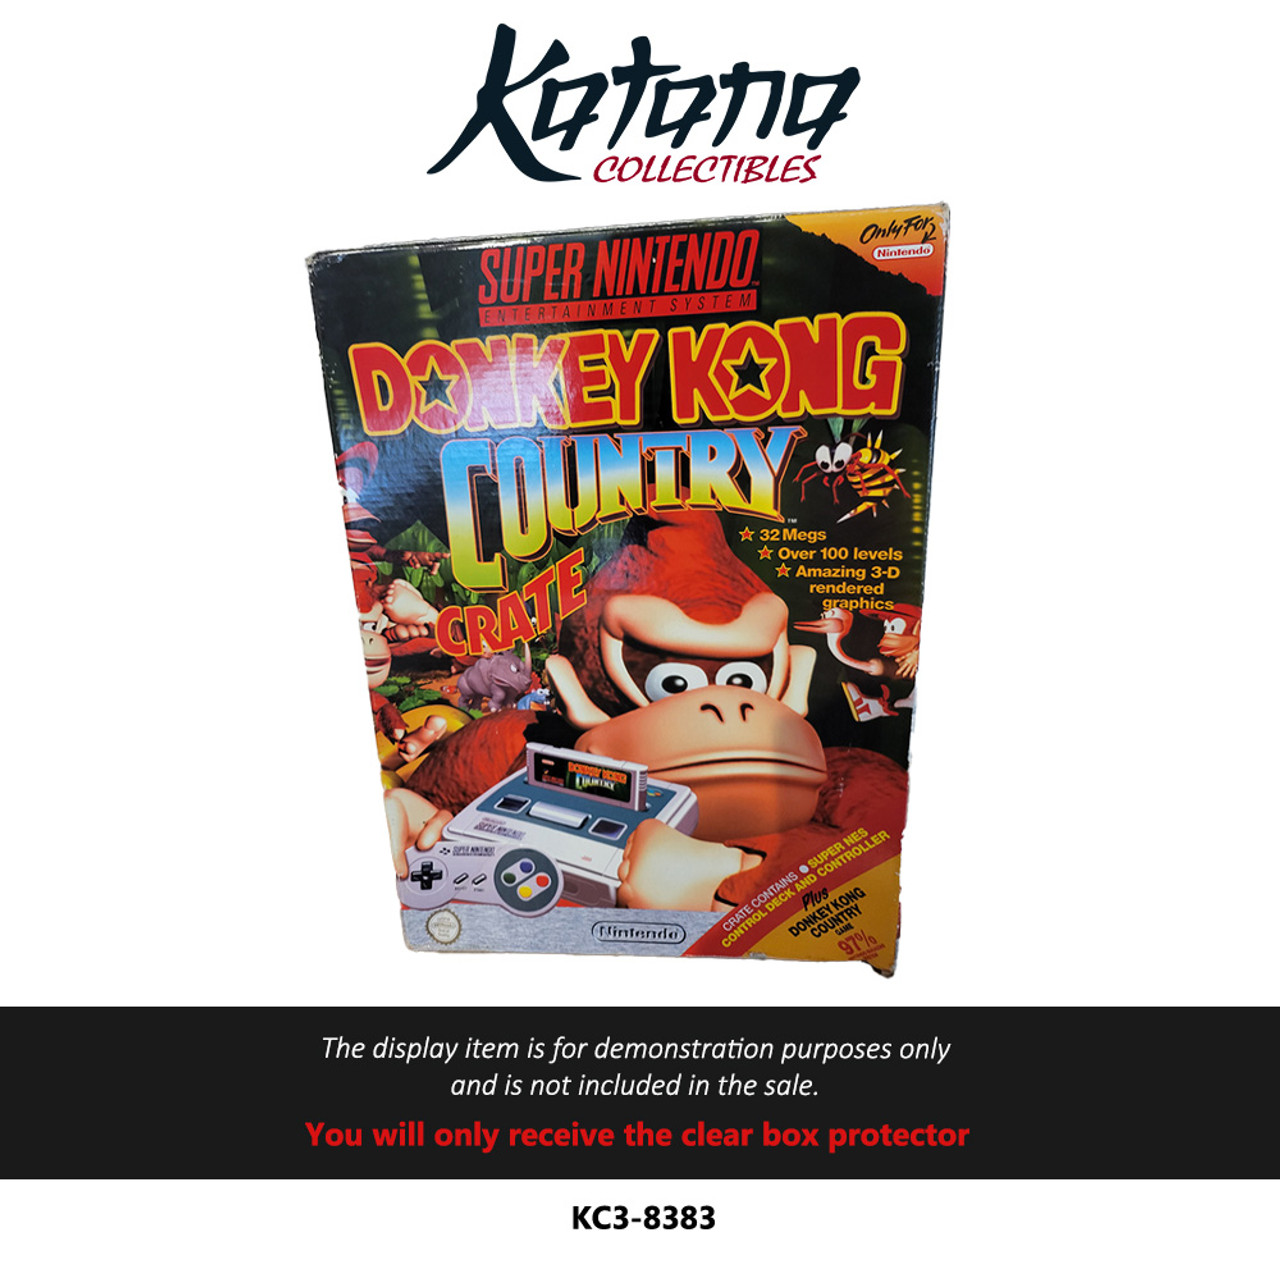 Katana Collectibles Protector For Donkey Kong Country Crate